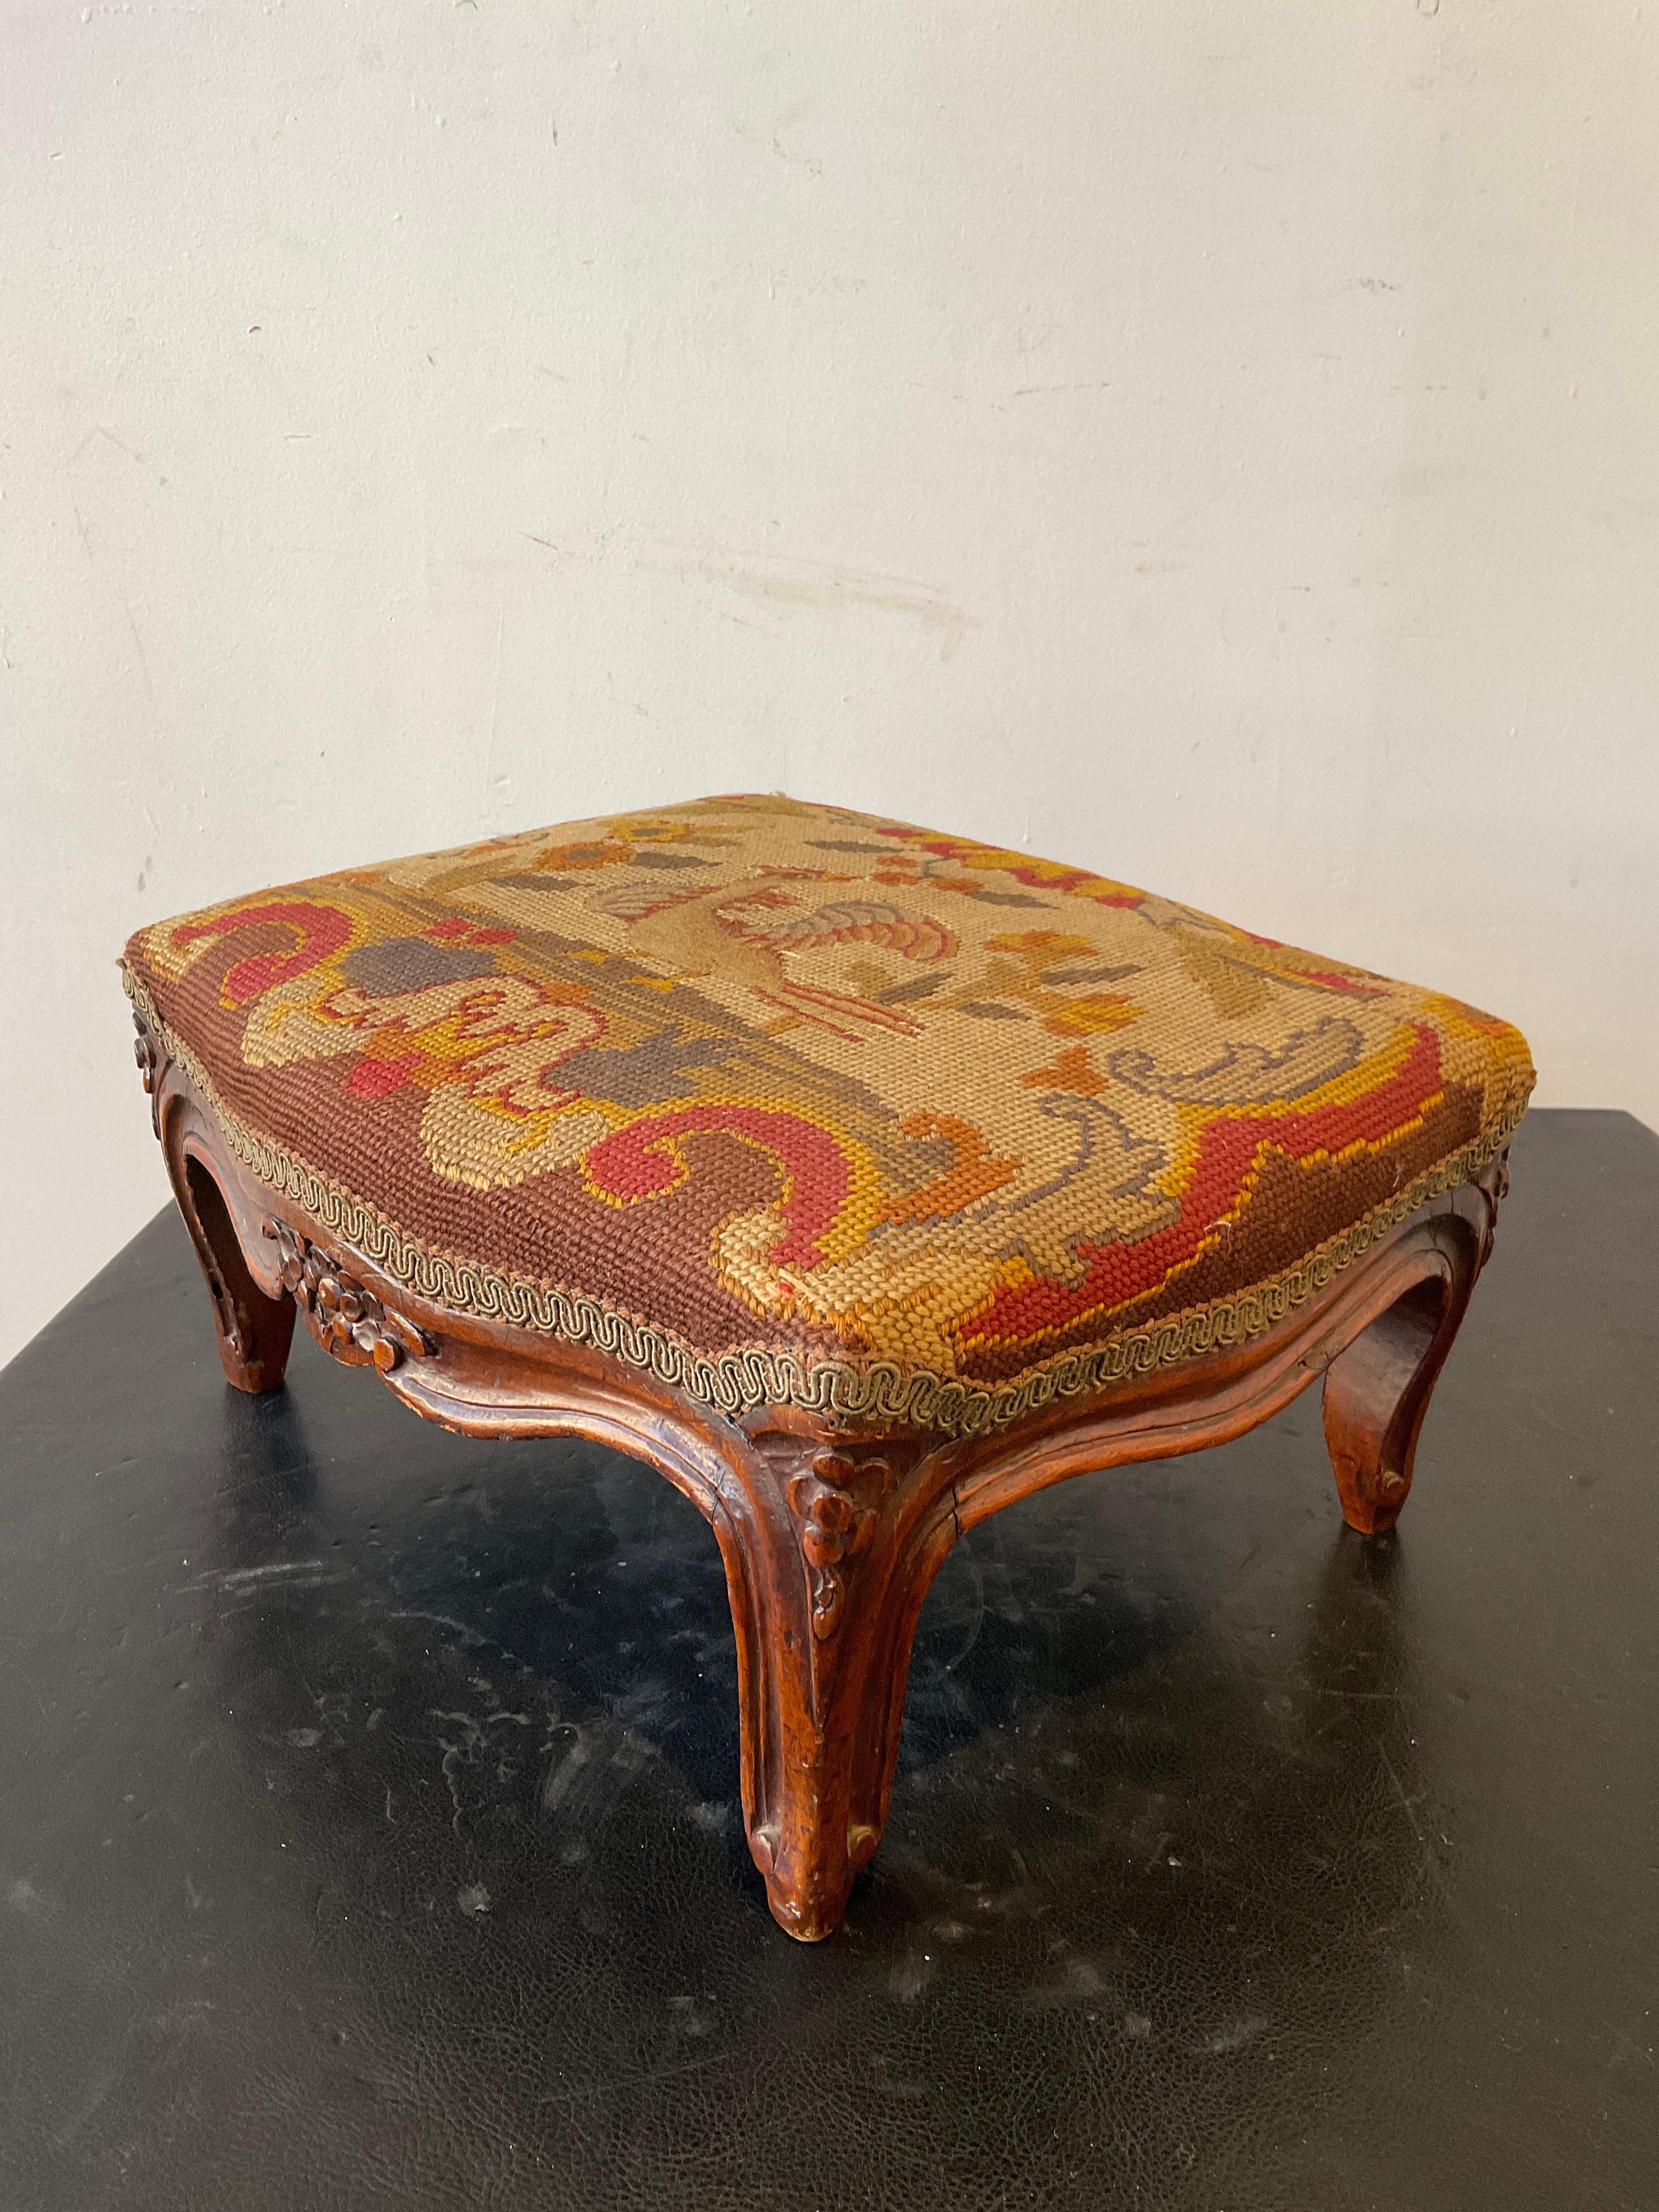 1910 French Hand Carved Wood Footstool with Needlepoint Top For Sale 1